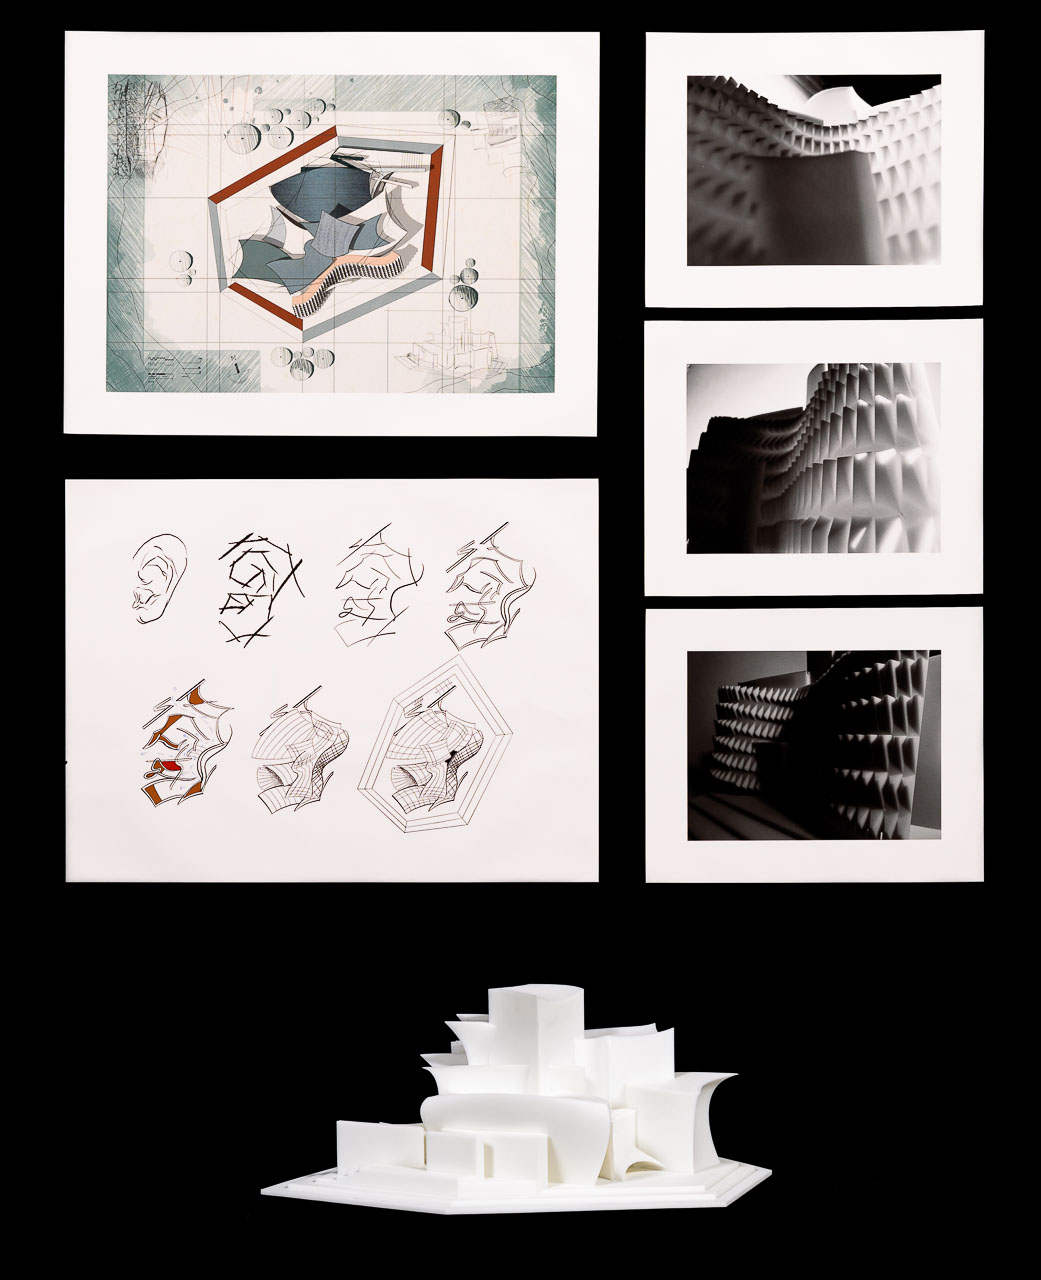 A sculptural architectural form accompanied by drawings of the structure.